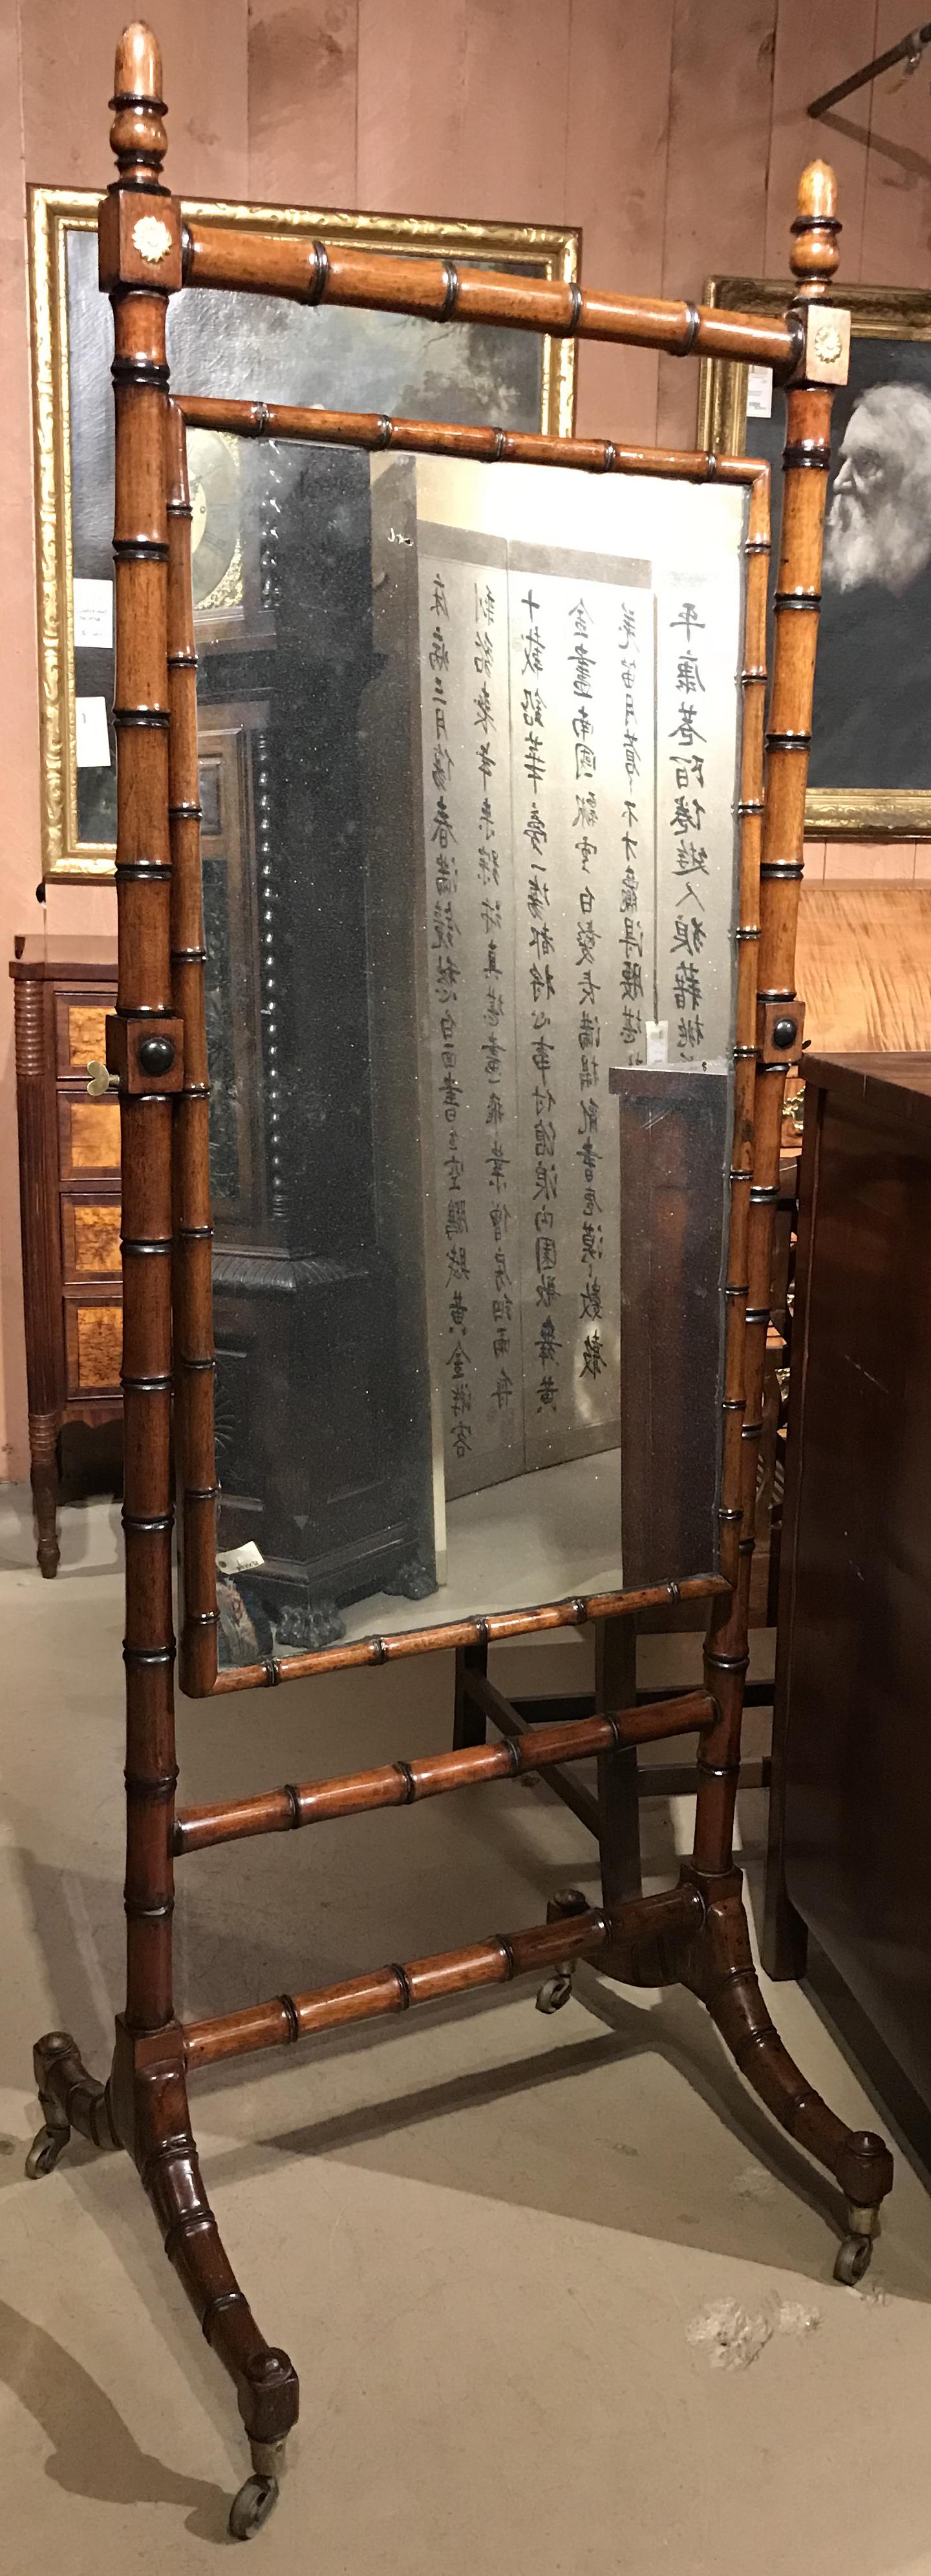 A fine example of a faux bamboo border rectangular cheval mirror on stand, with gilt carved upper corner rosettes, and brass casters on its base frame. Very good overall condition, with some old repairs, mirror surface losses, other minor